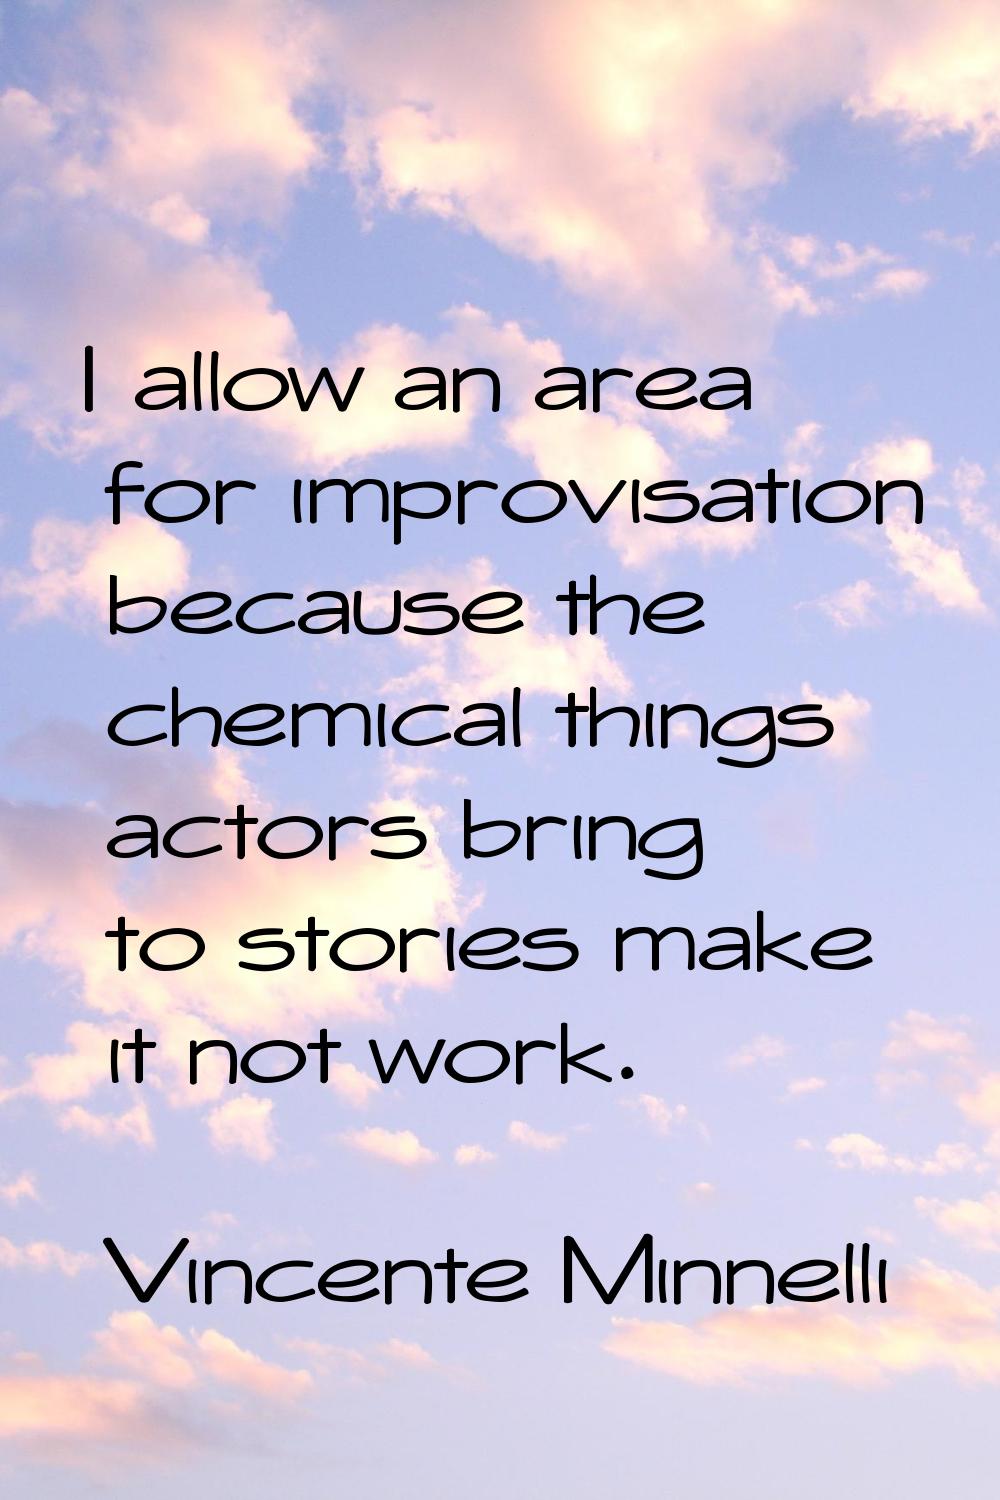 I allow an area for improvisation because the chemical things actors bring to stories make it not w